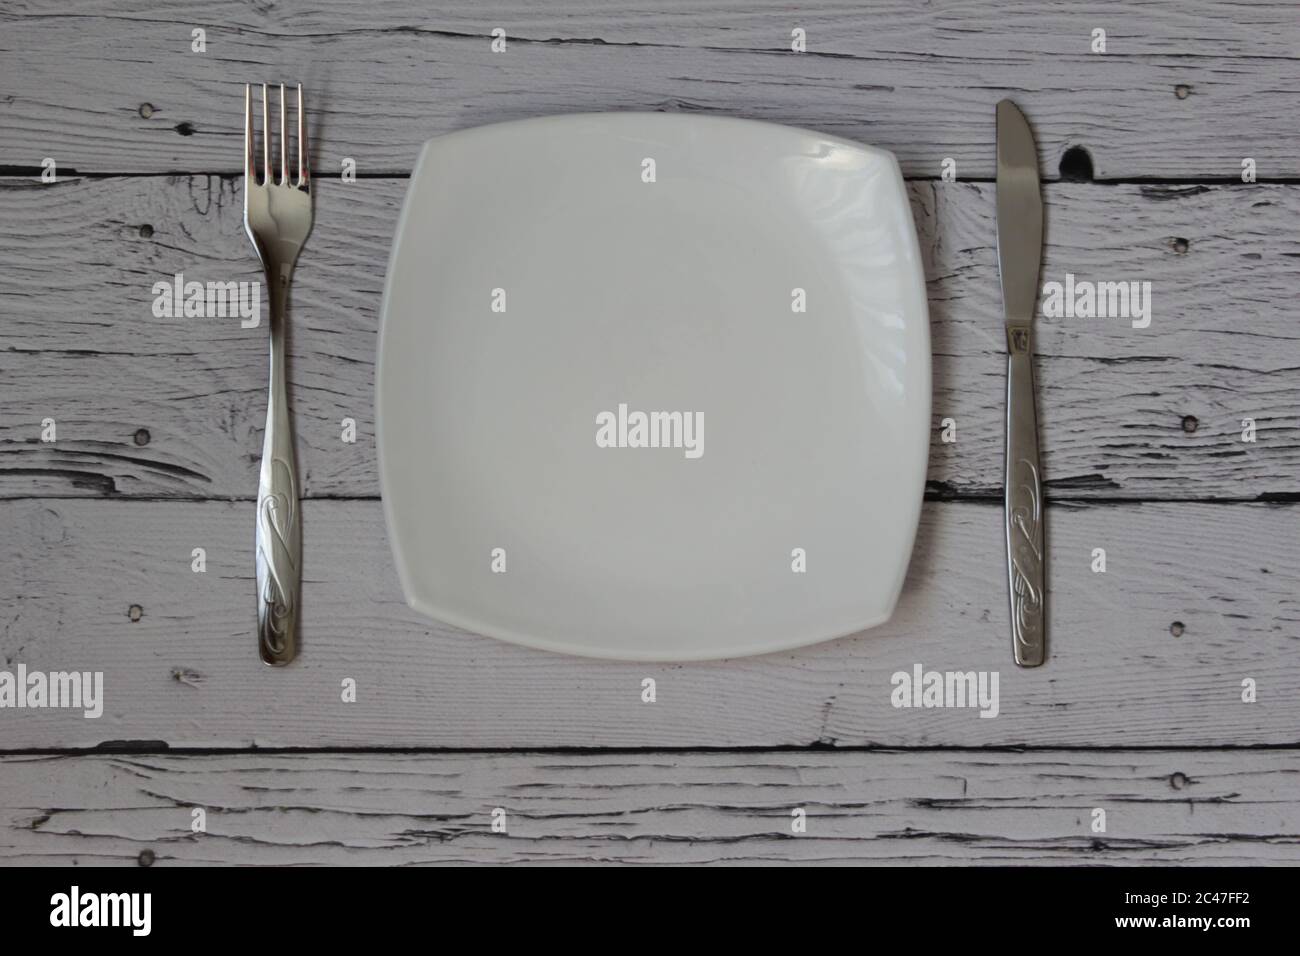 Empty plate, fork and knife over wooden background. Clean plate and cutlery on light background. Top view. Flat lay. Stock Photo